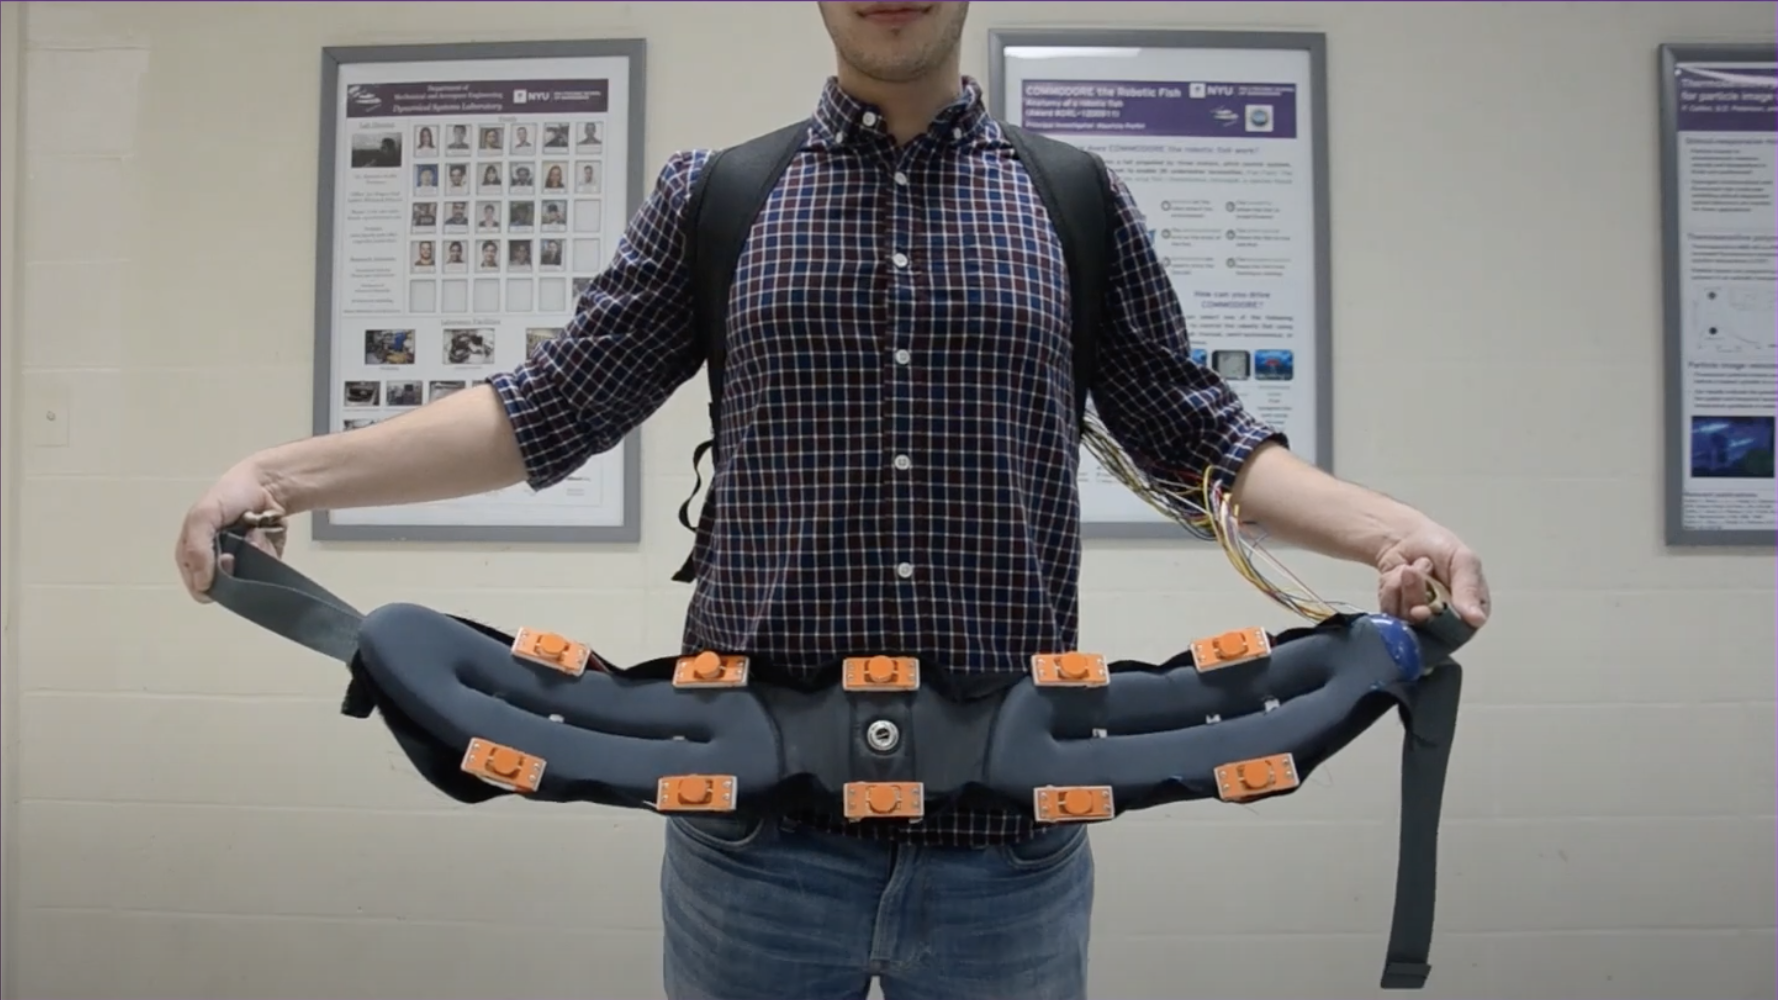 Belt and vest with sensors and haptic feedback devices for visually impaired pedestrians.